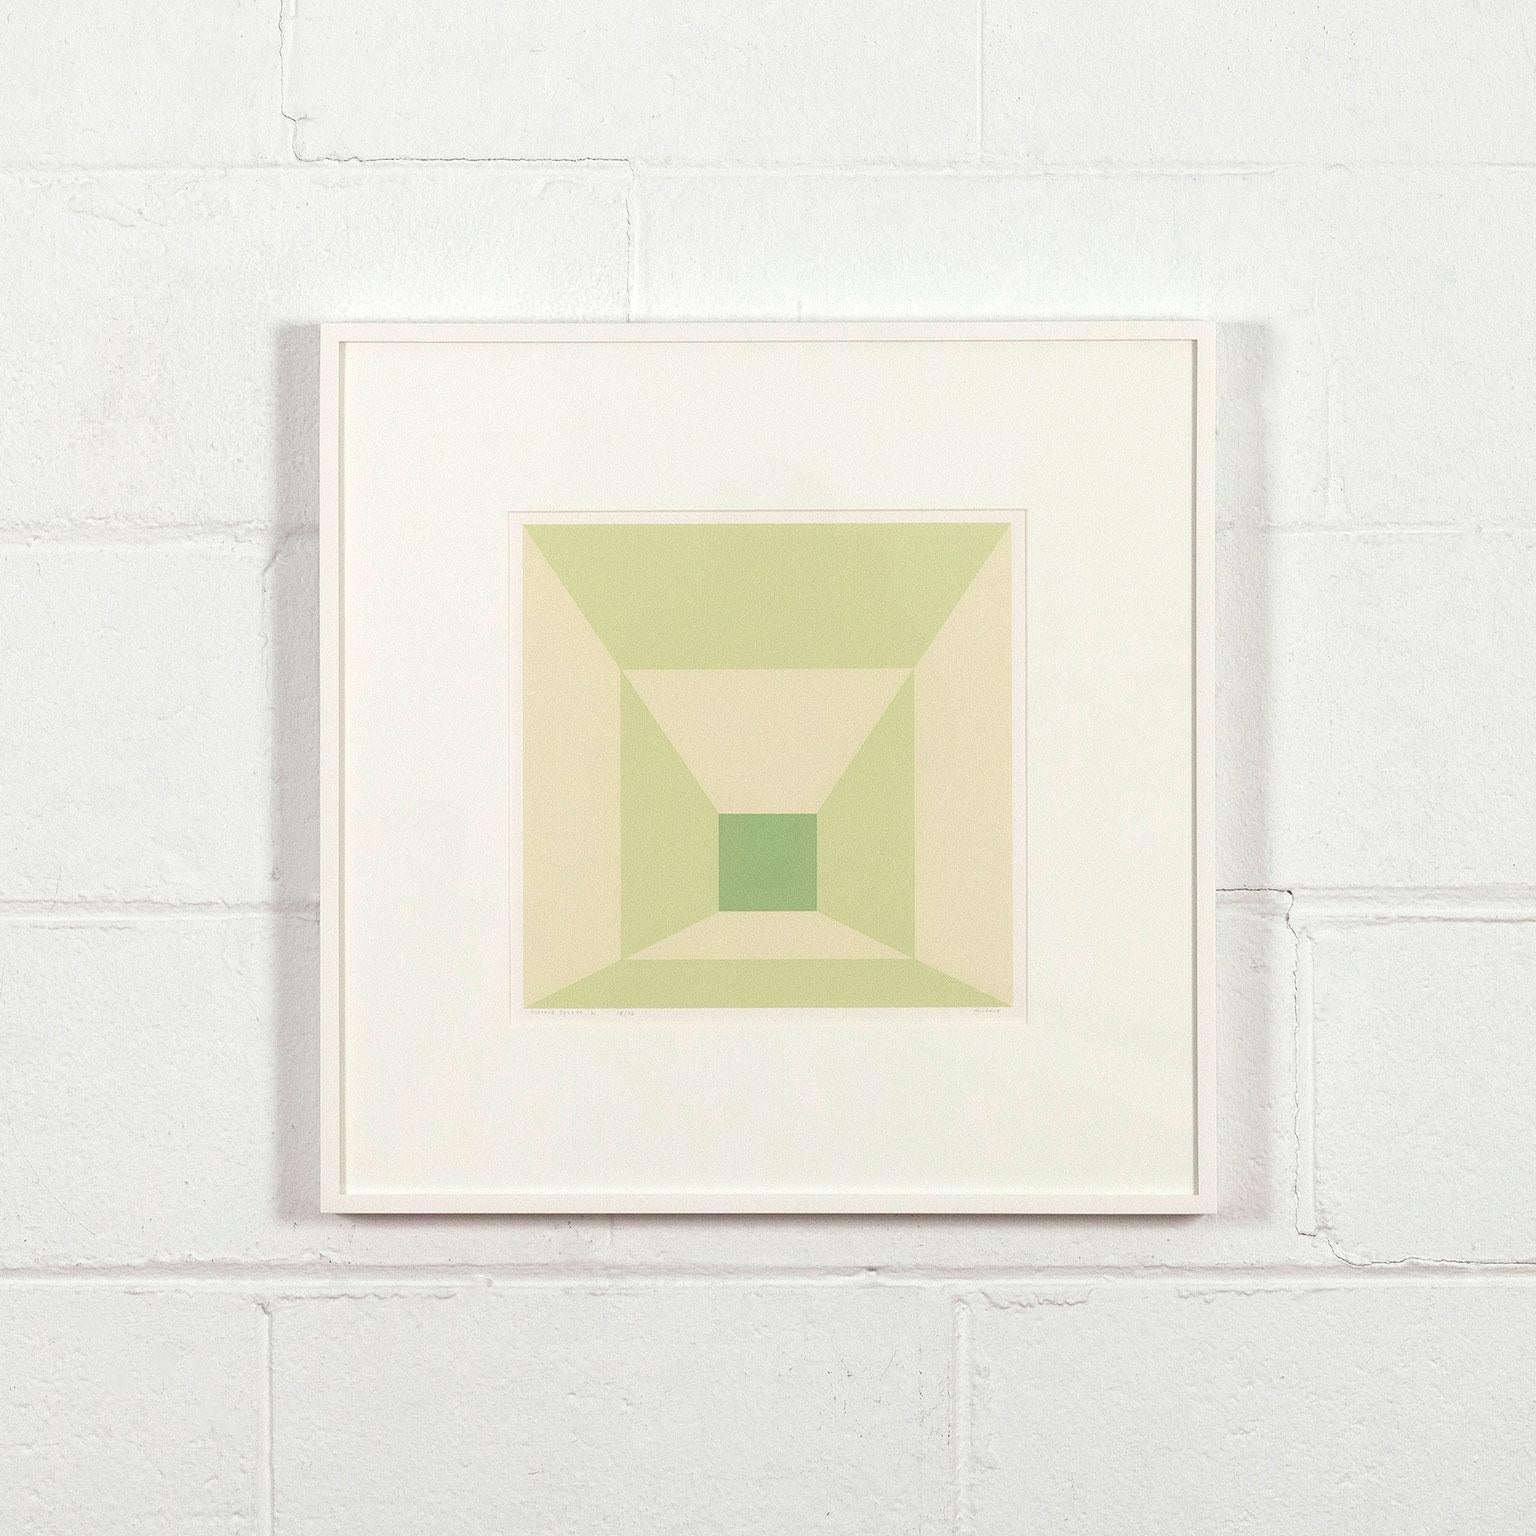 Josef Albers (1888-1976) is affiliated with, or an active participant within numerous movements that have defined visual culture in the 20th century. 

Albers was a student and later a professor at the Bauhaus in Germany.

After the prestigious